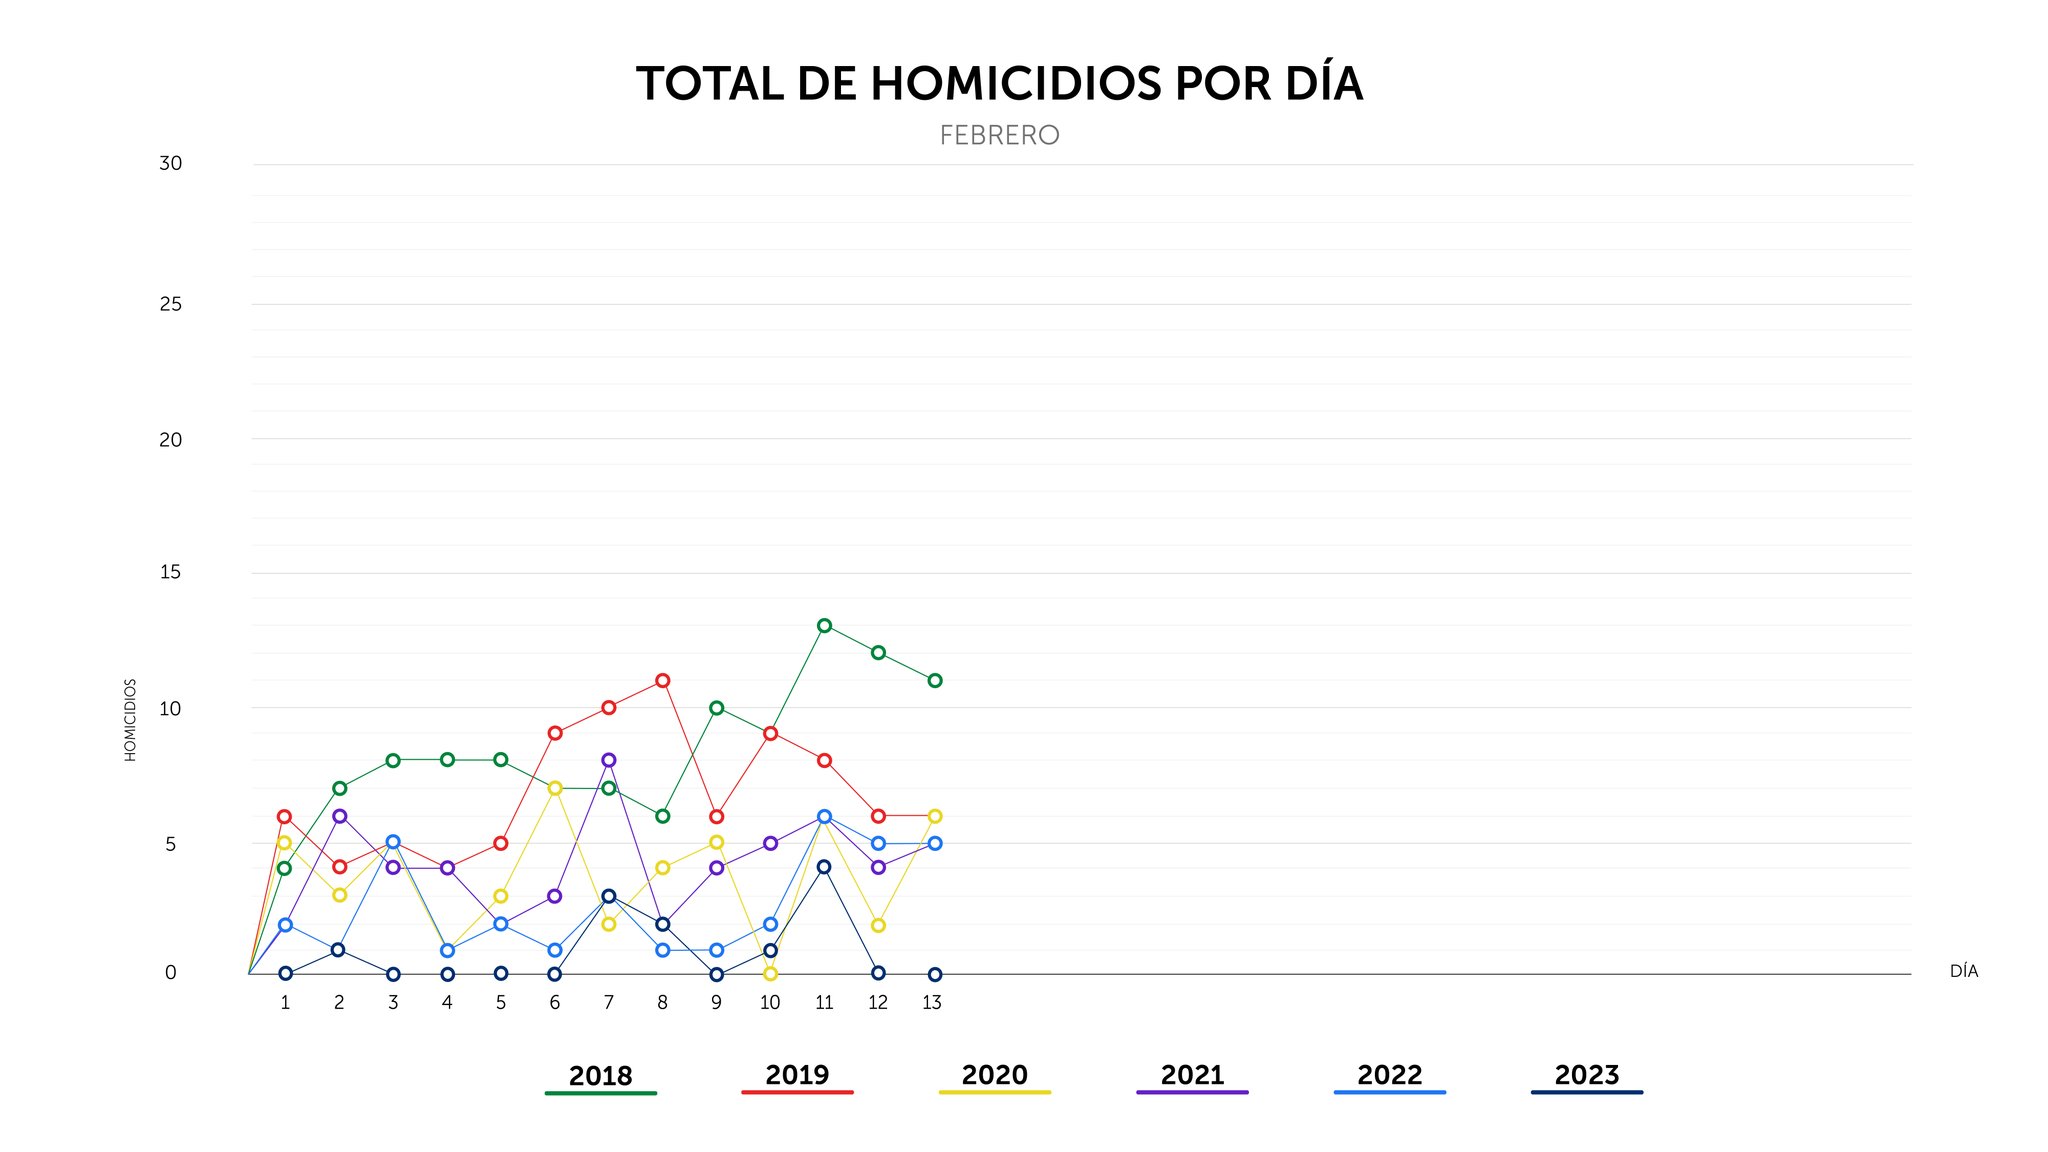 A chart from the National Police's Twitter account showing the number of homicides per day in February. They caption the chart "Finalizamos el lunes 13 de febrero, con 0 homicidios en el país." In English, "We ended on Monday, February 13, with 0 homicides in the country."